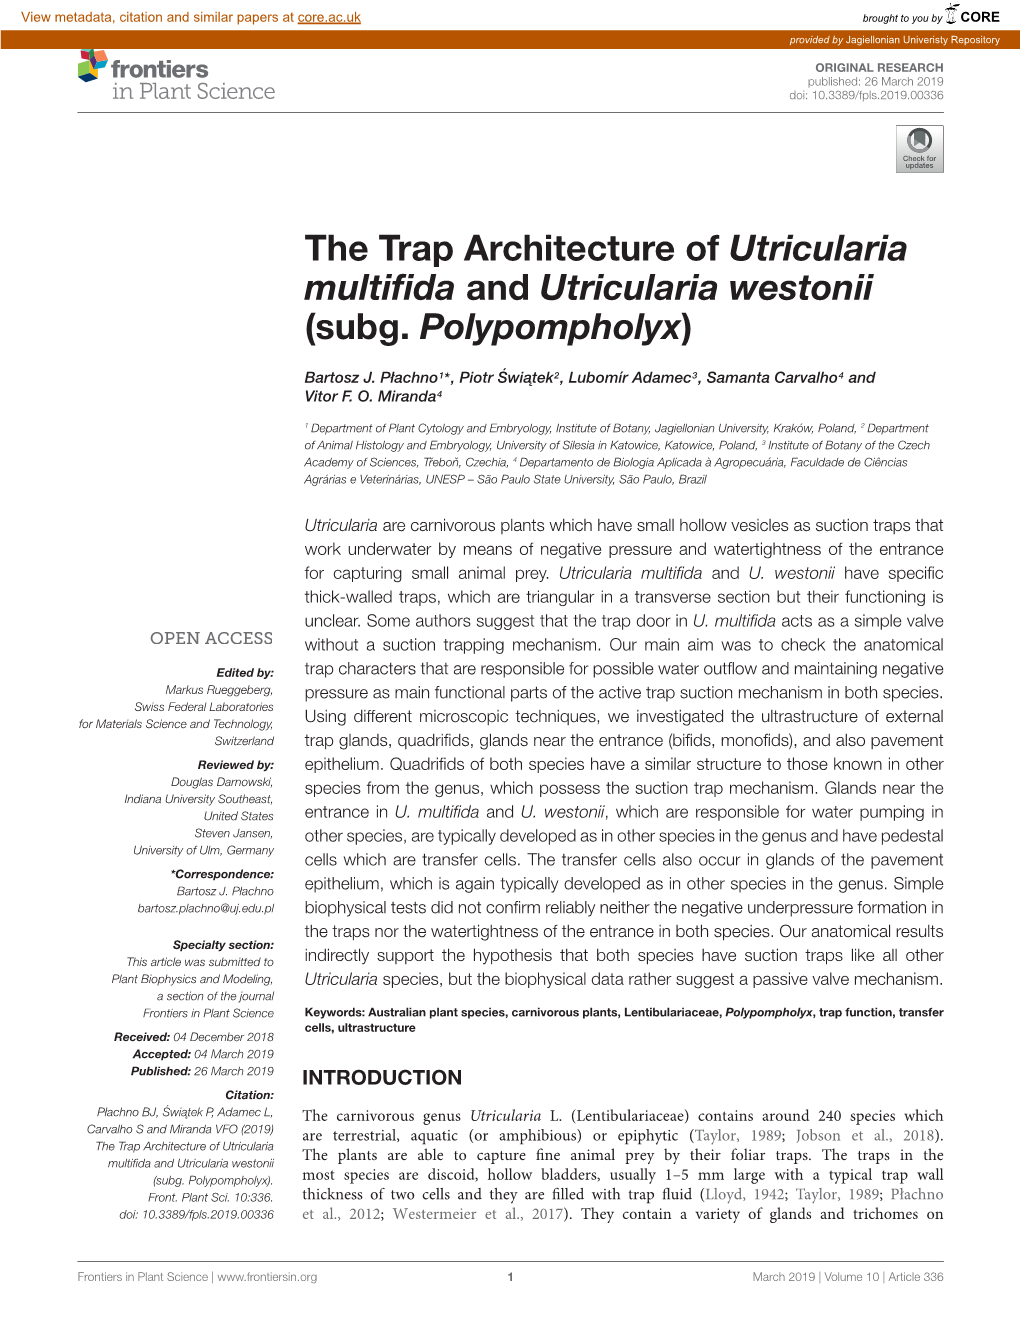 The Trap Architecture of Utricularia Multifida and Utricularia Westonii (Subg. Polypompholyx)